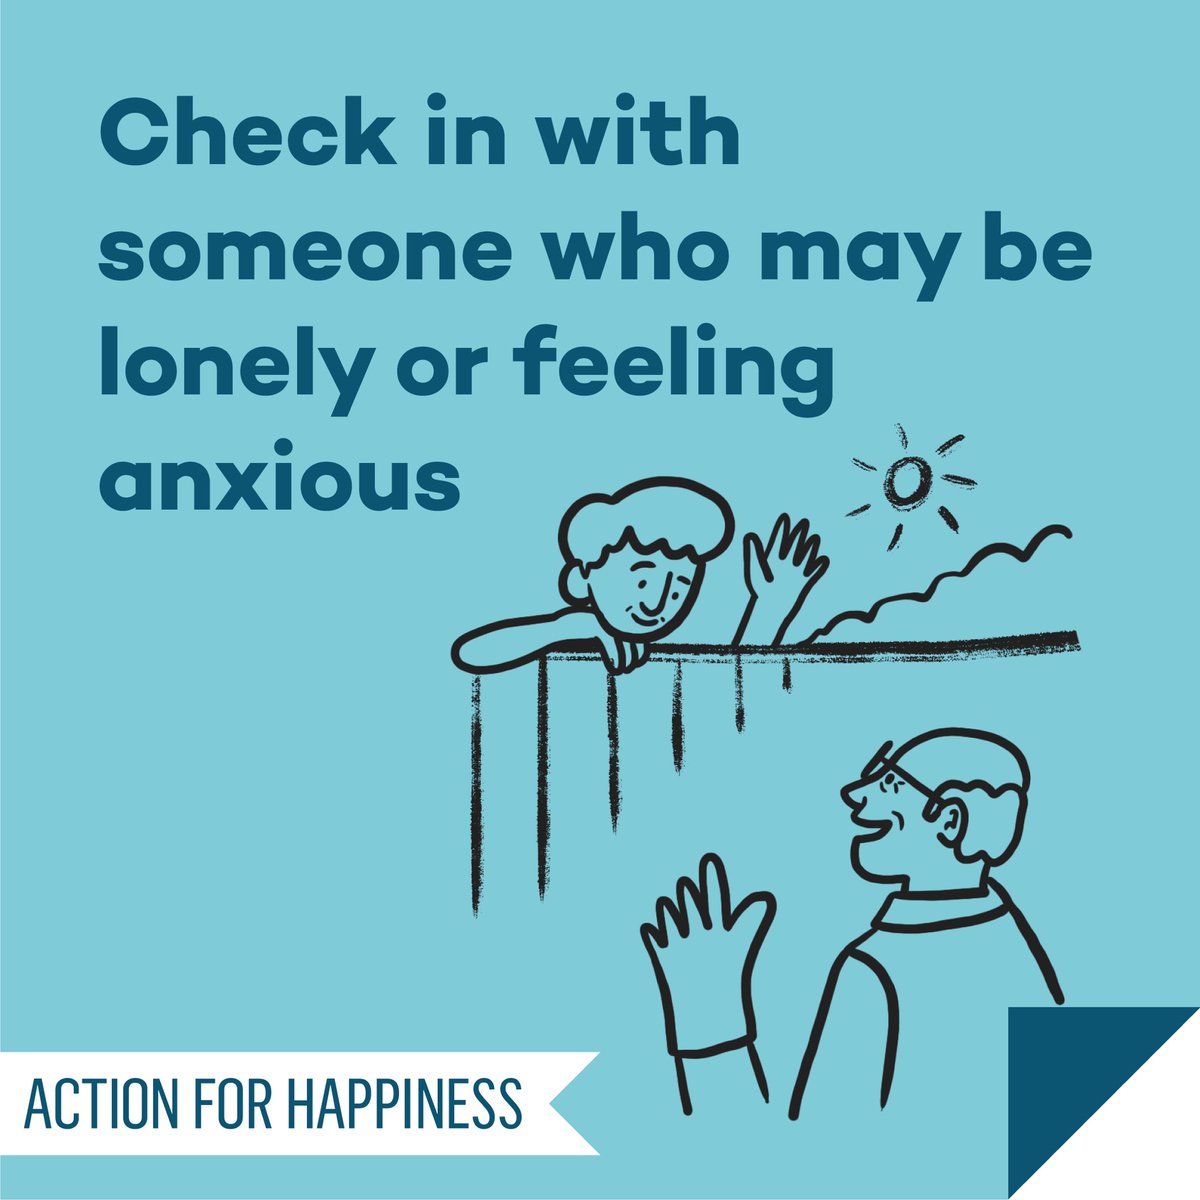 Altruistic August - Day 10: Check in with someone who may be lonely or feeling anxious actionforhappiness.org/altruistic-aug… #AltruisticAugust